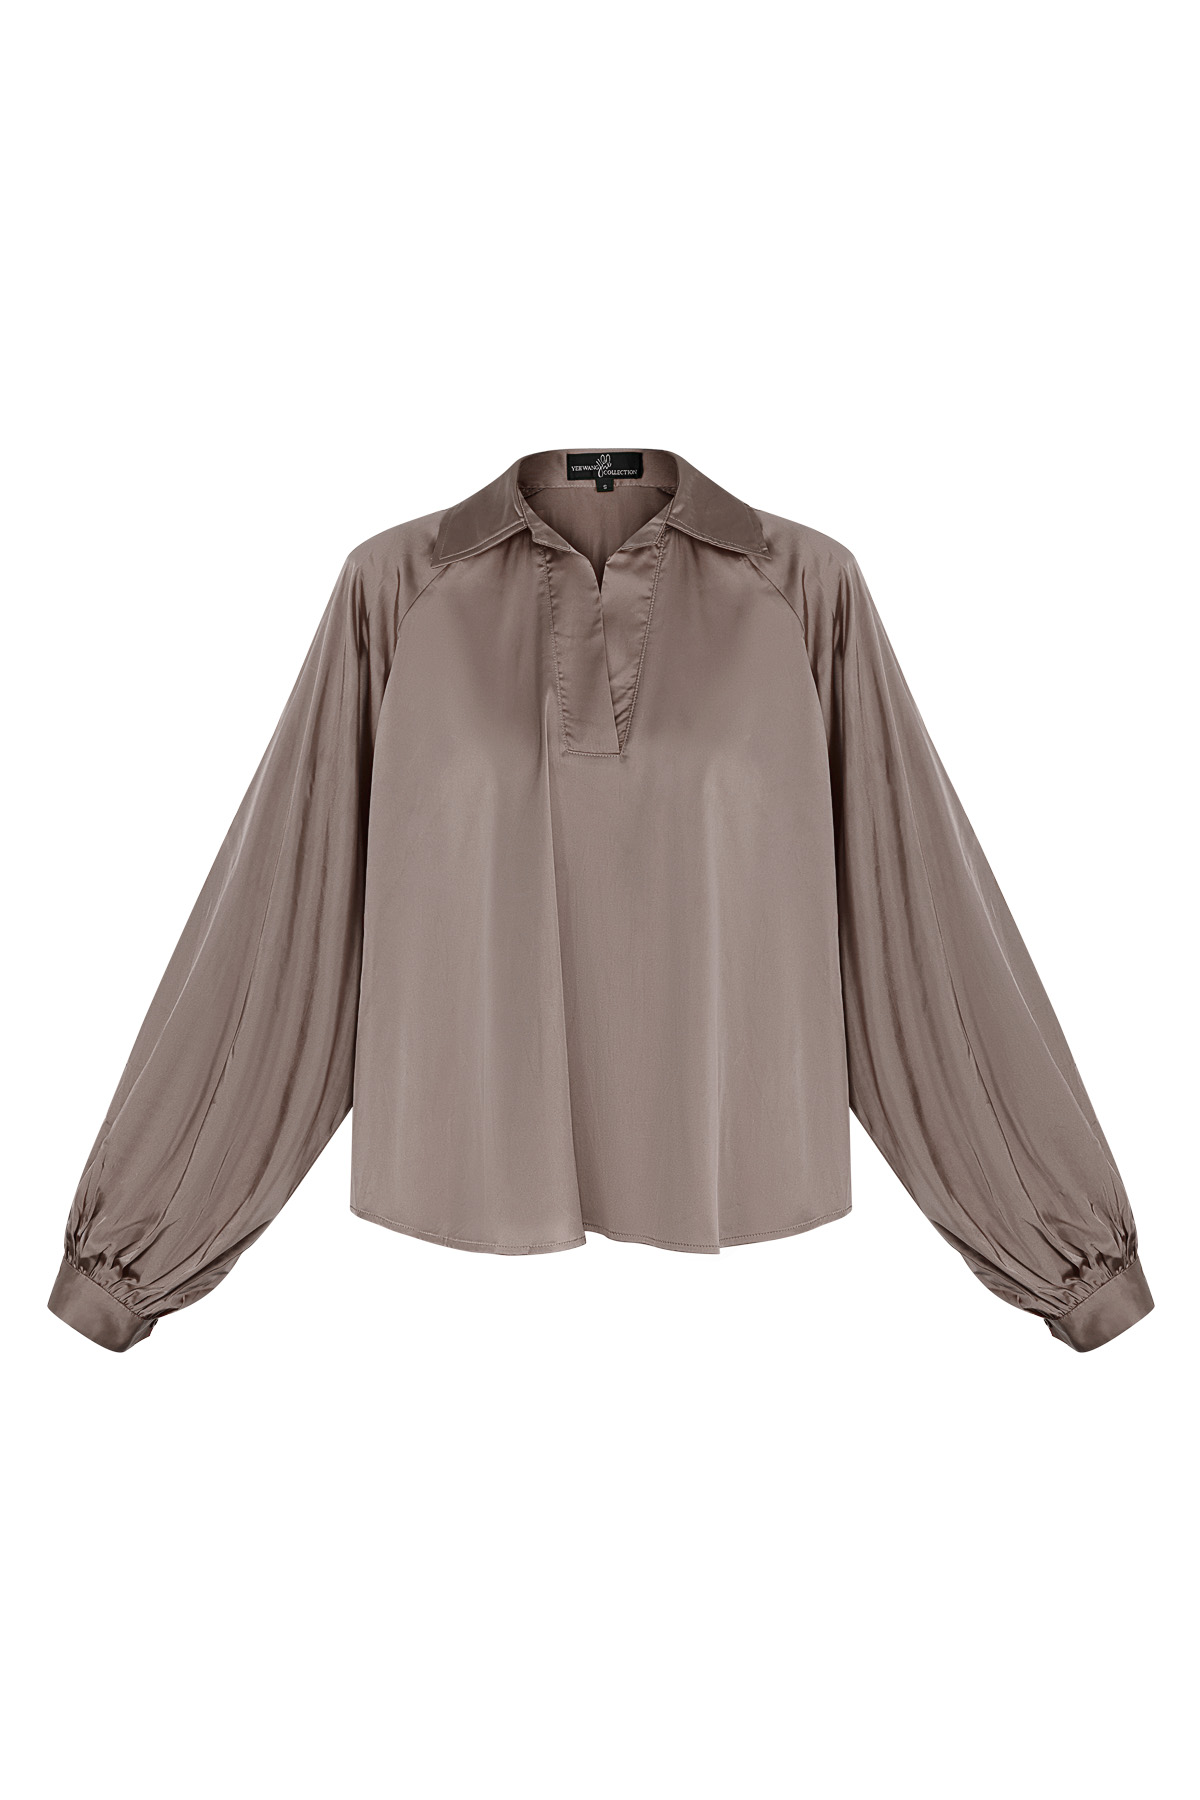 Blouse puffed sleeve brown h5 